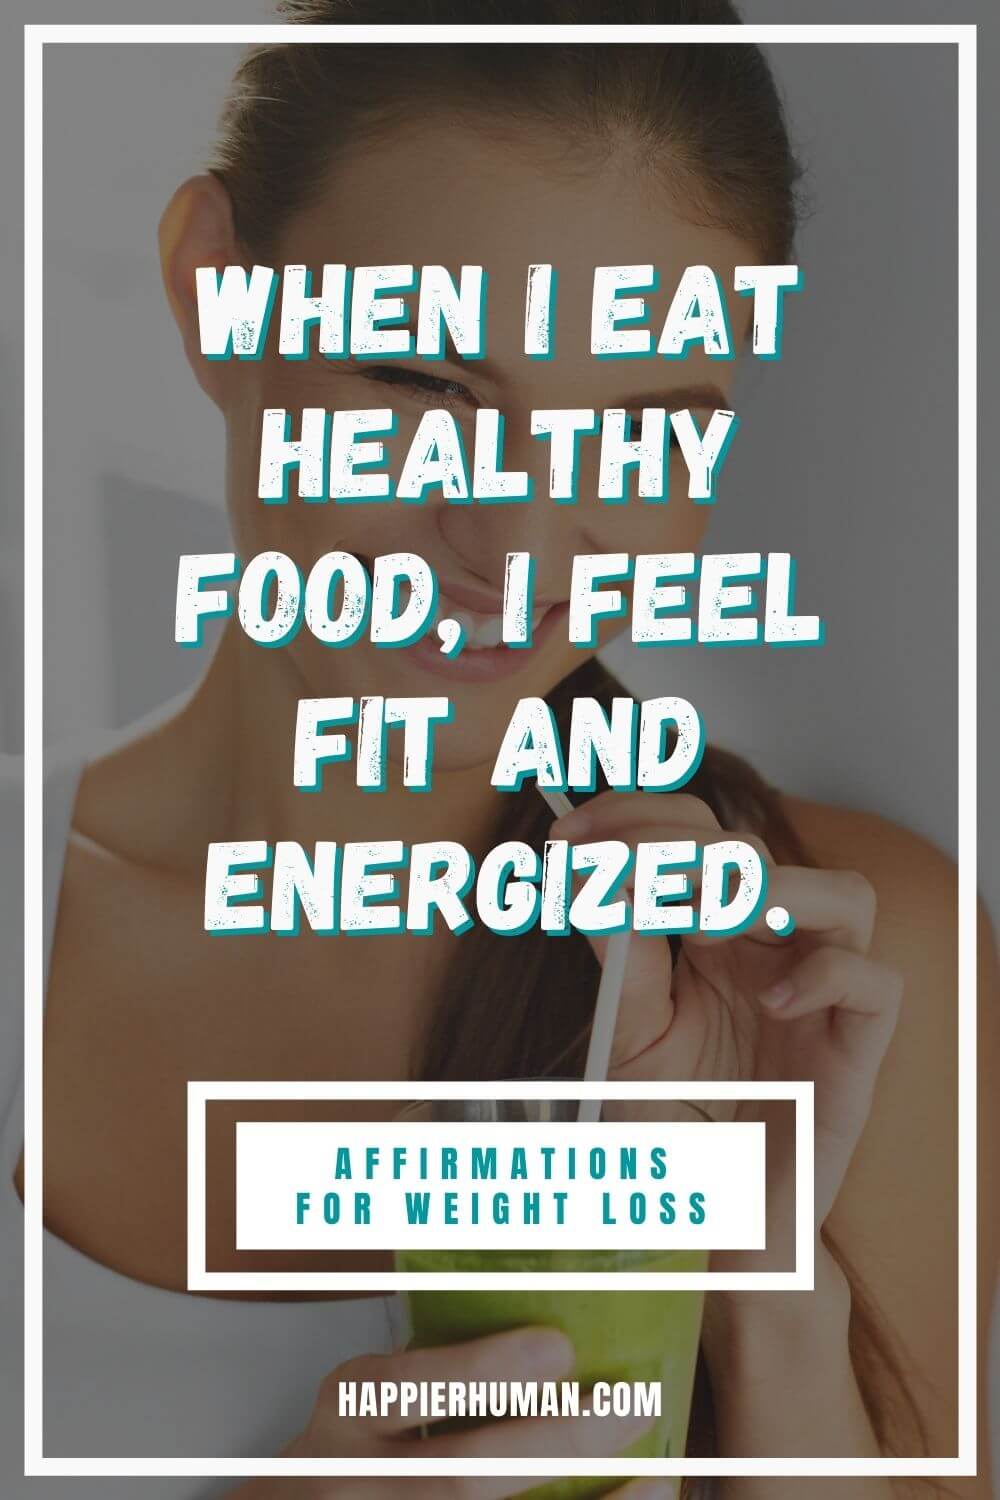 Affirmations For Weight Loss - When I eat healthy food, I feel fit and energized. | law of attraction weight loss affirmations | reiki affirmations for weight loss | manifestation affirmations for weight loss